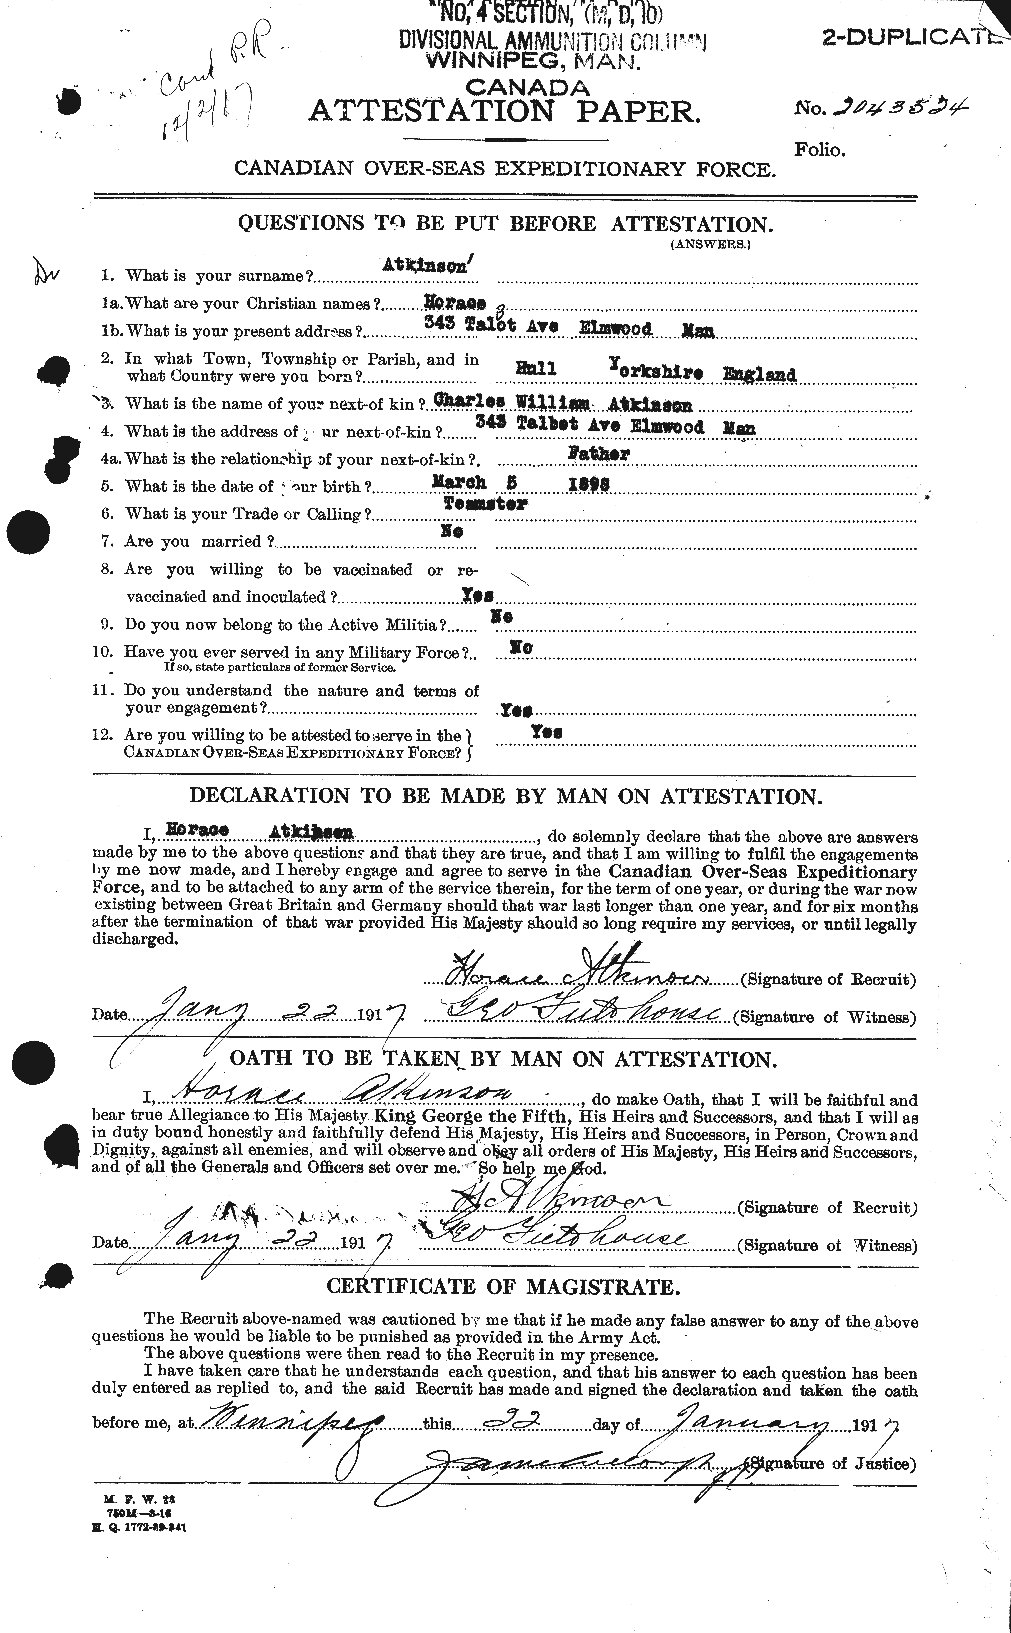 Personnel Records of the First World War - CEF 217363a